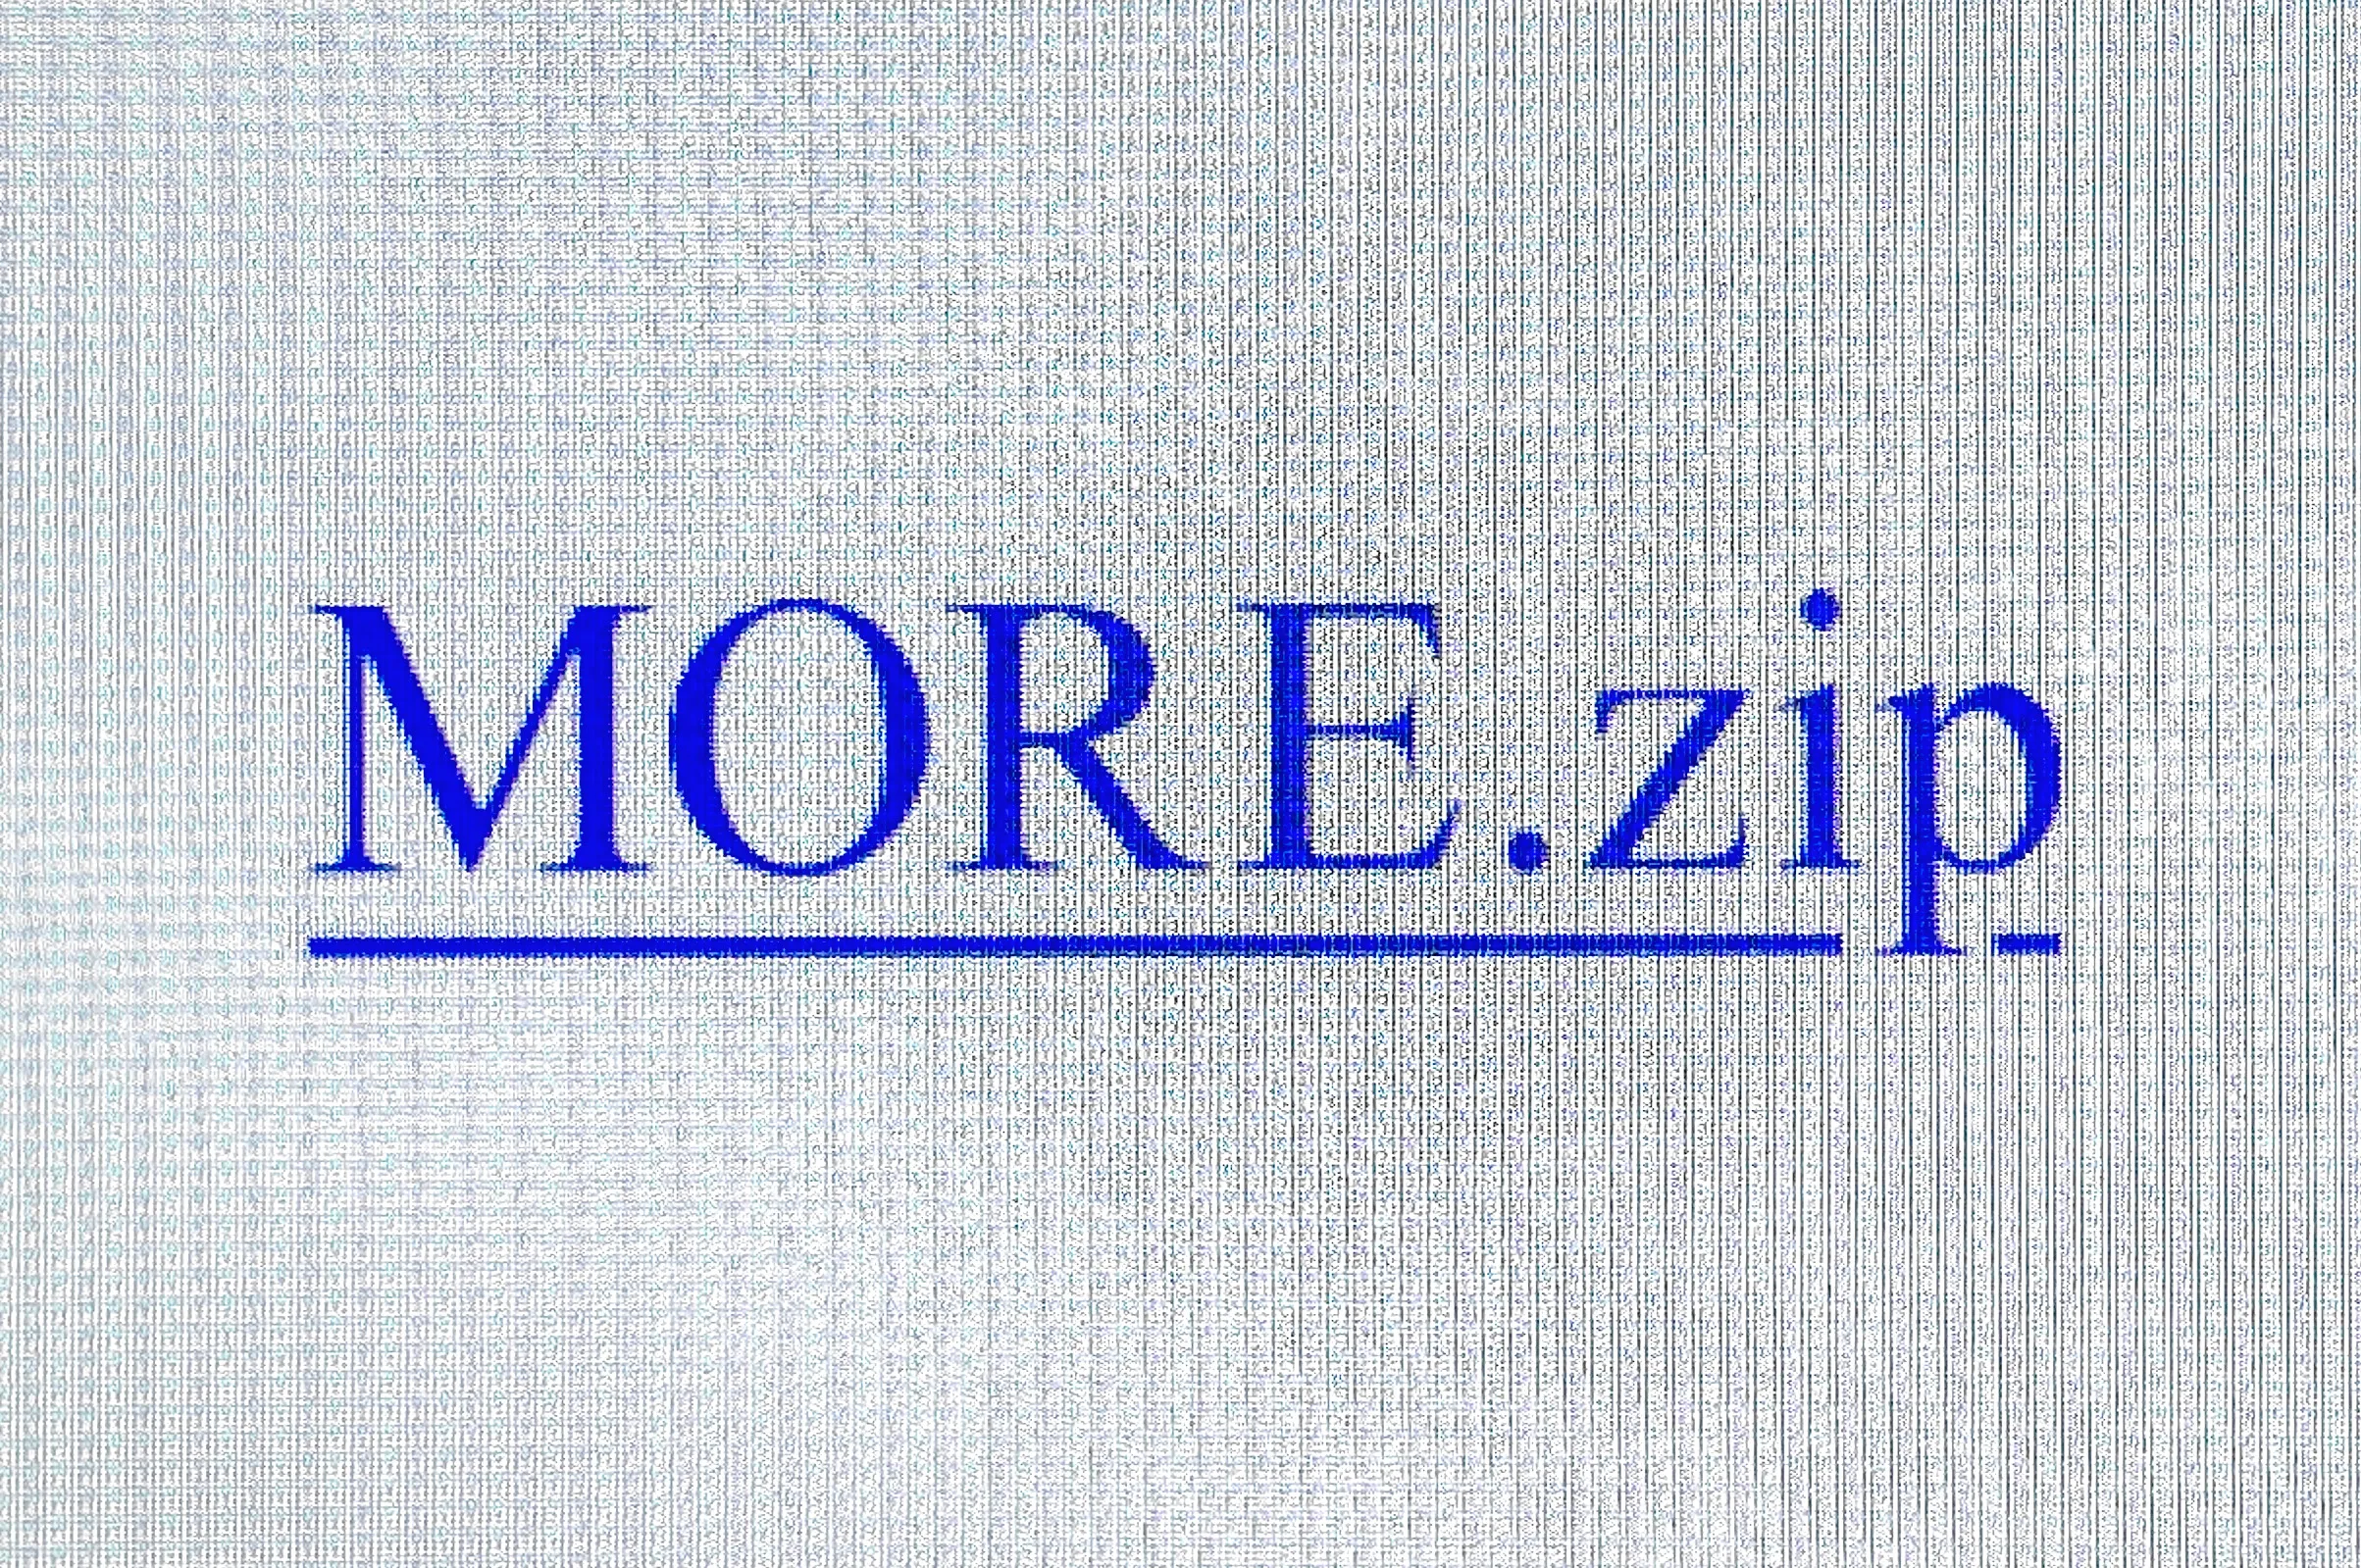 Preview of exhibition named "MORE.zip"